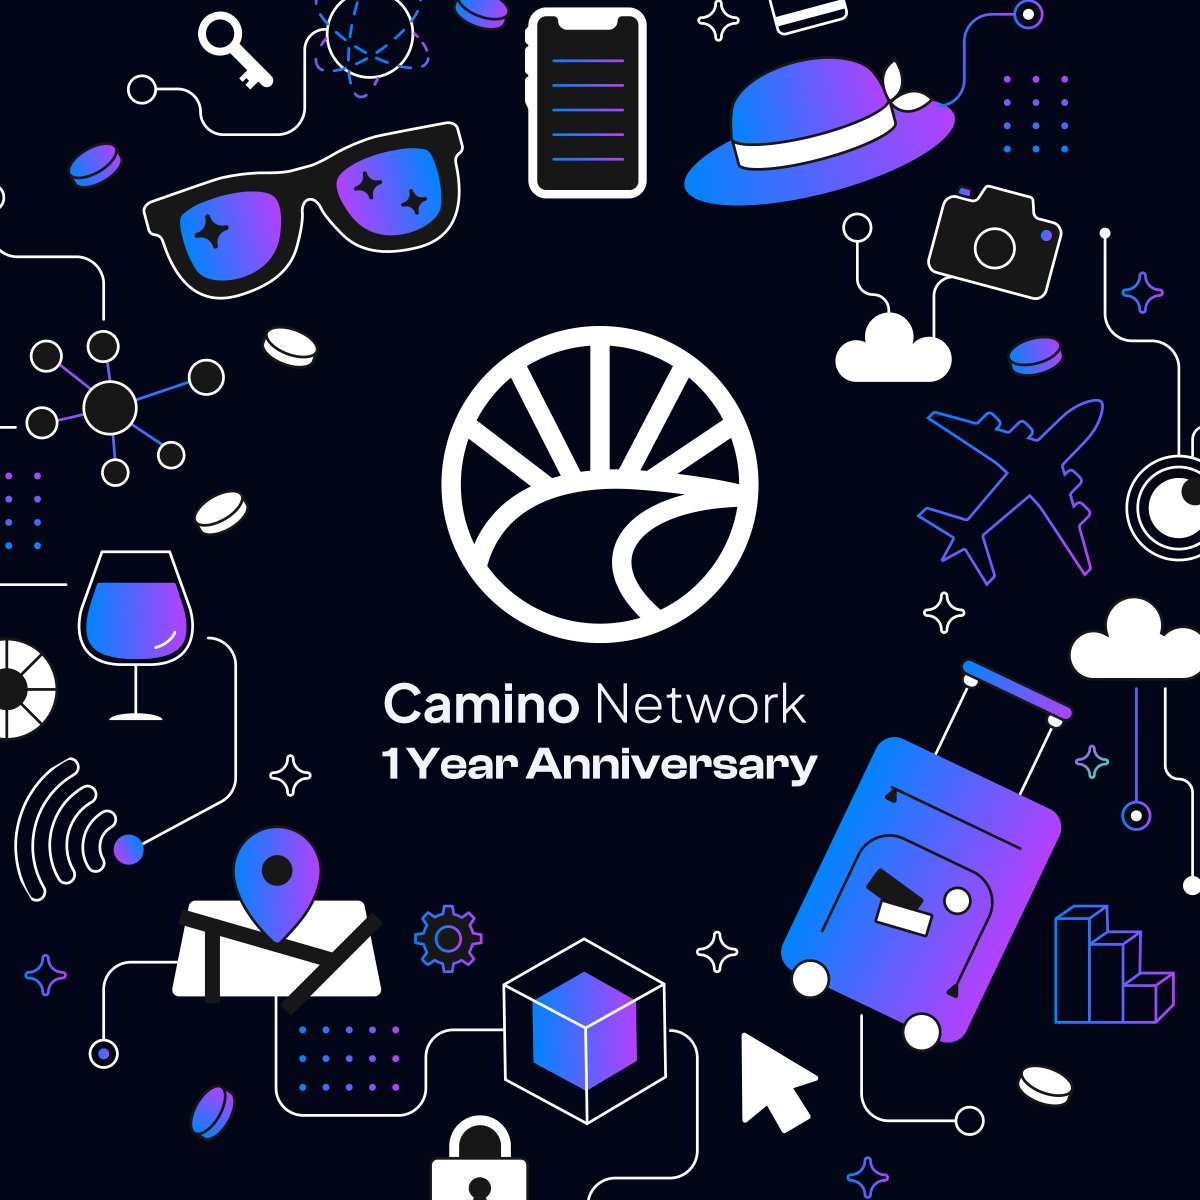 To celebrate Camino Network's first anniversary, we are thrilled to present this exclusive #NFTcollection to our community. 🚀Over 9k NFTS have been sent to your wallets. These digital assets commemorate a year marked by growth, challenges, and achievements. Thank you all…